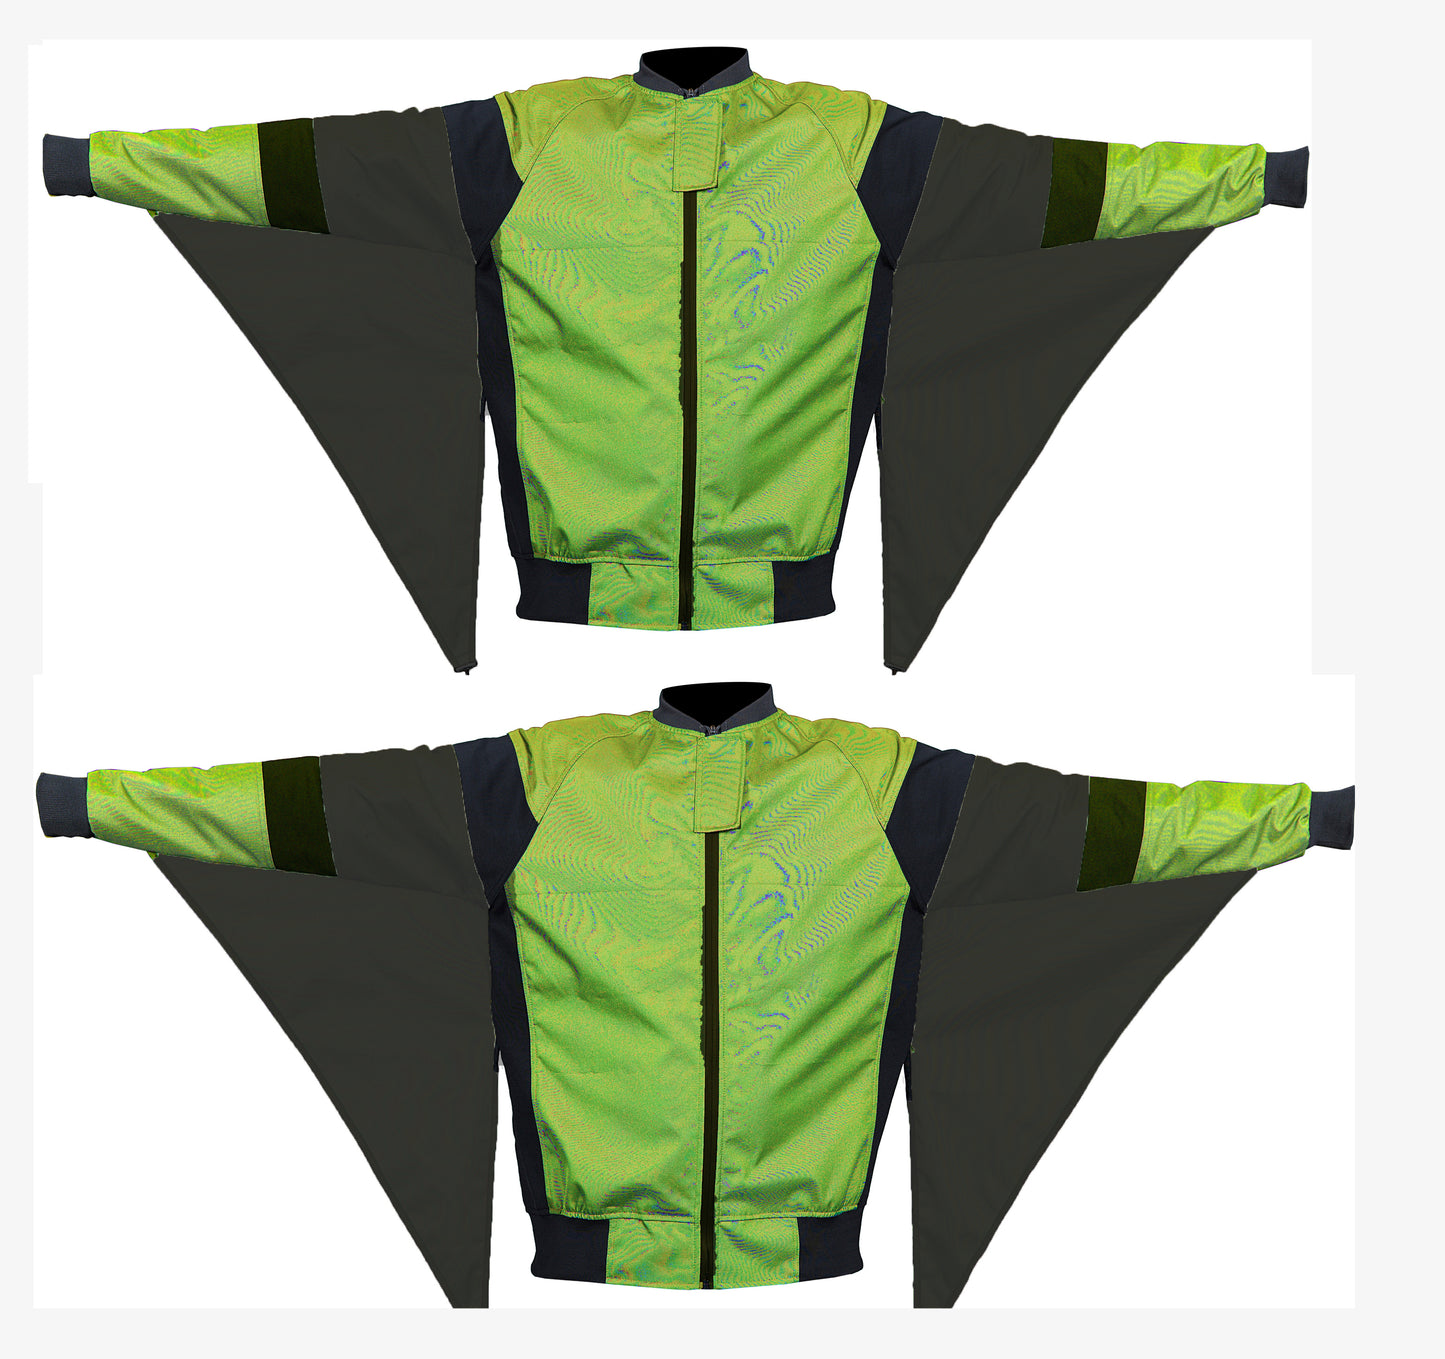 Unique colors Skydiving Camera jacket nd-036